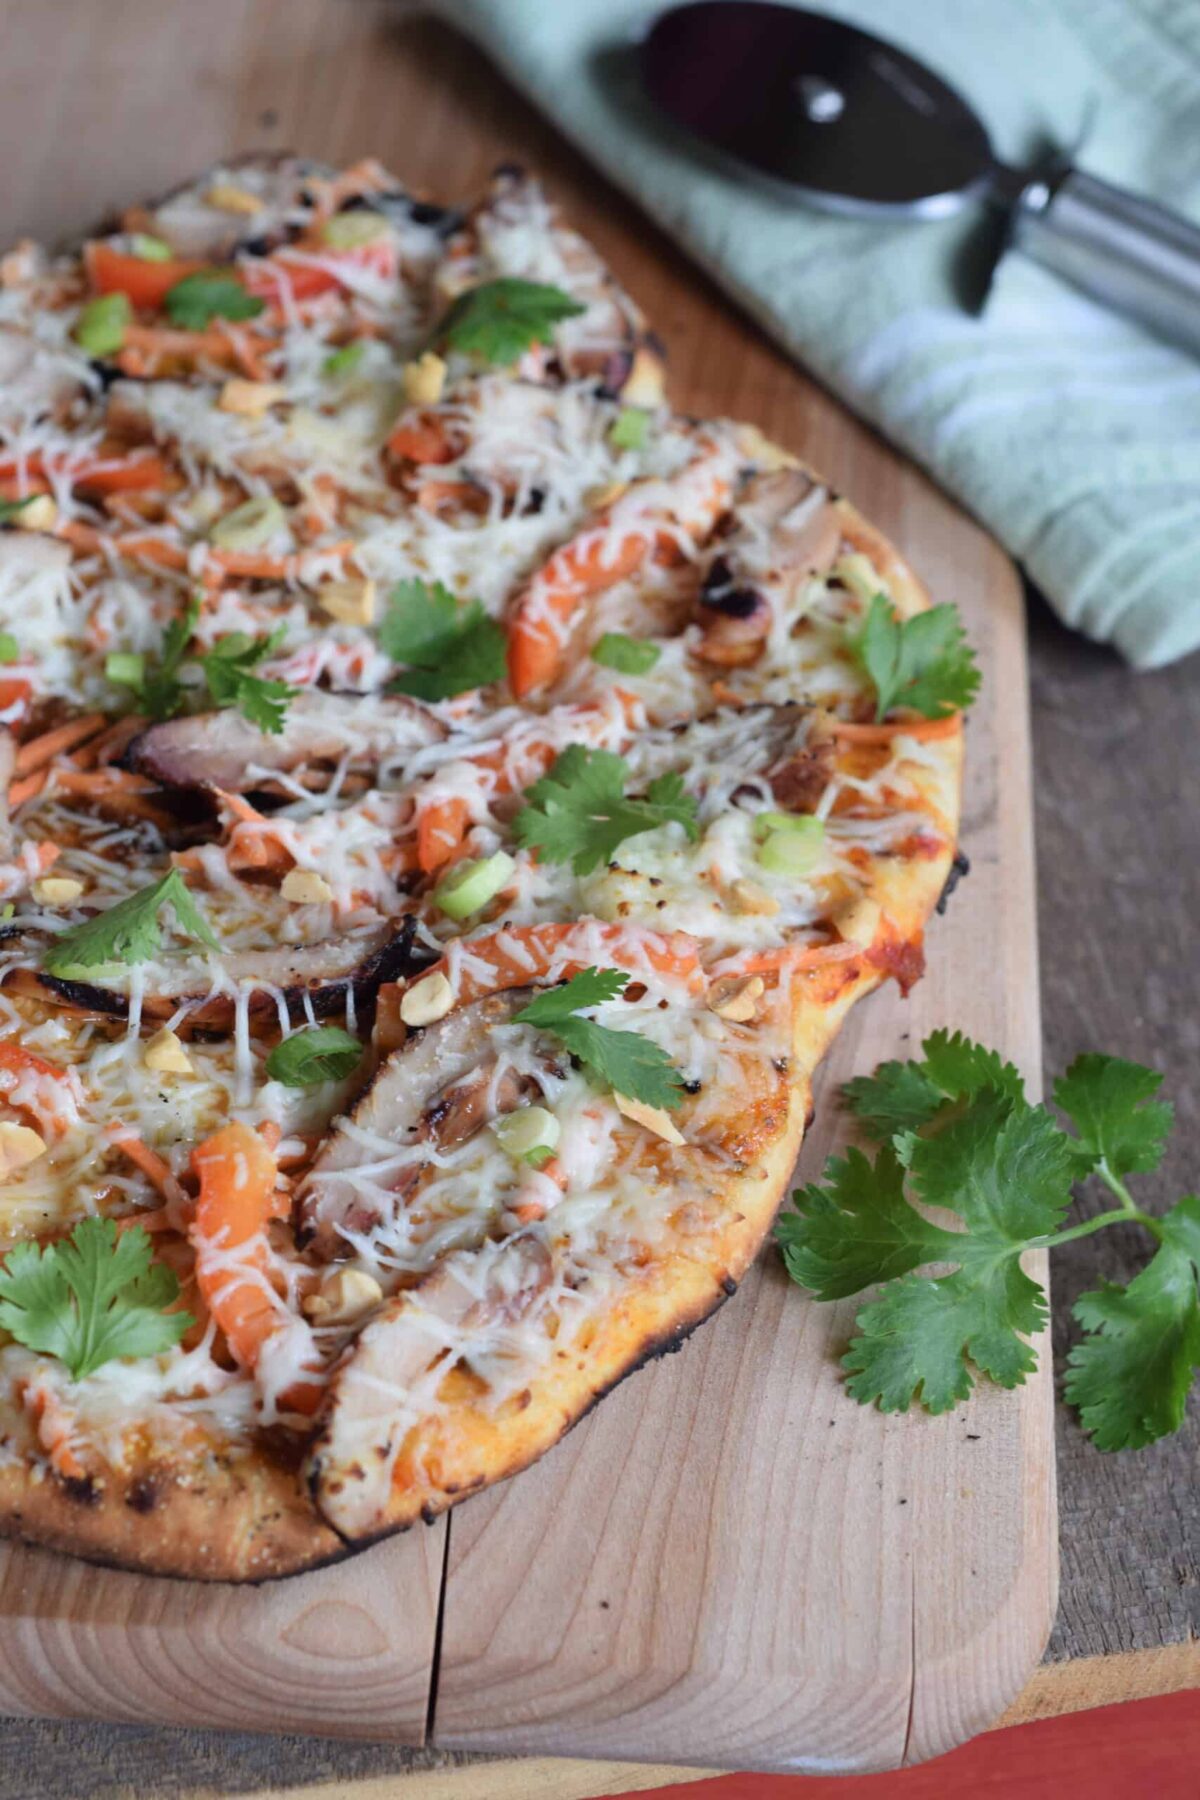 Thai Chicken Grilled Pizza made with Naan bread. Pizza wheel and cutting board